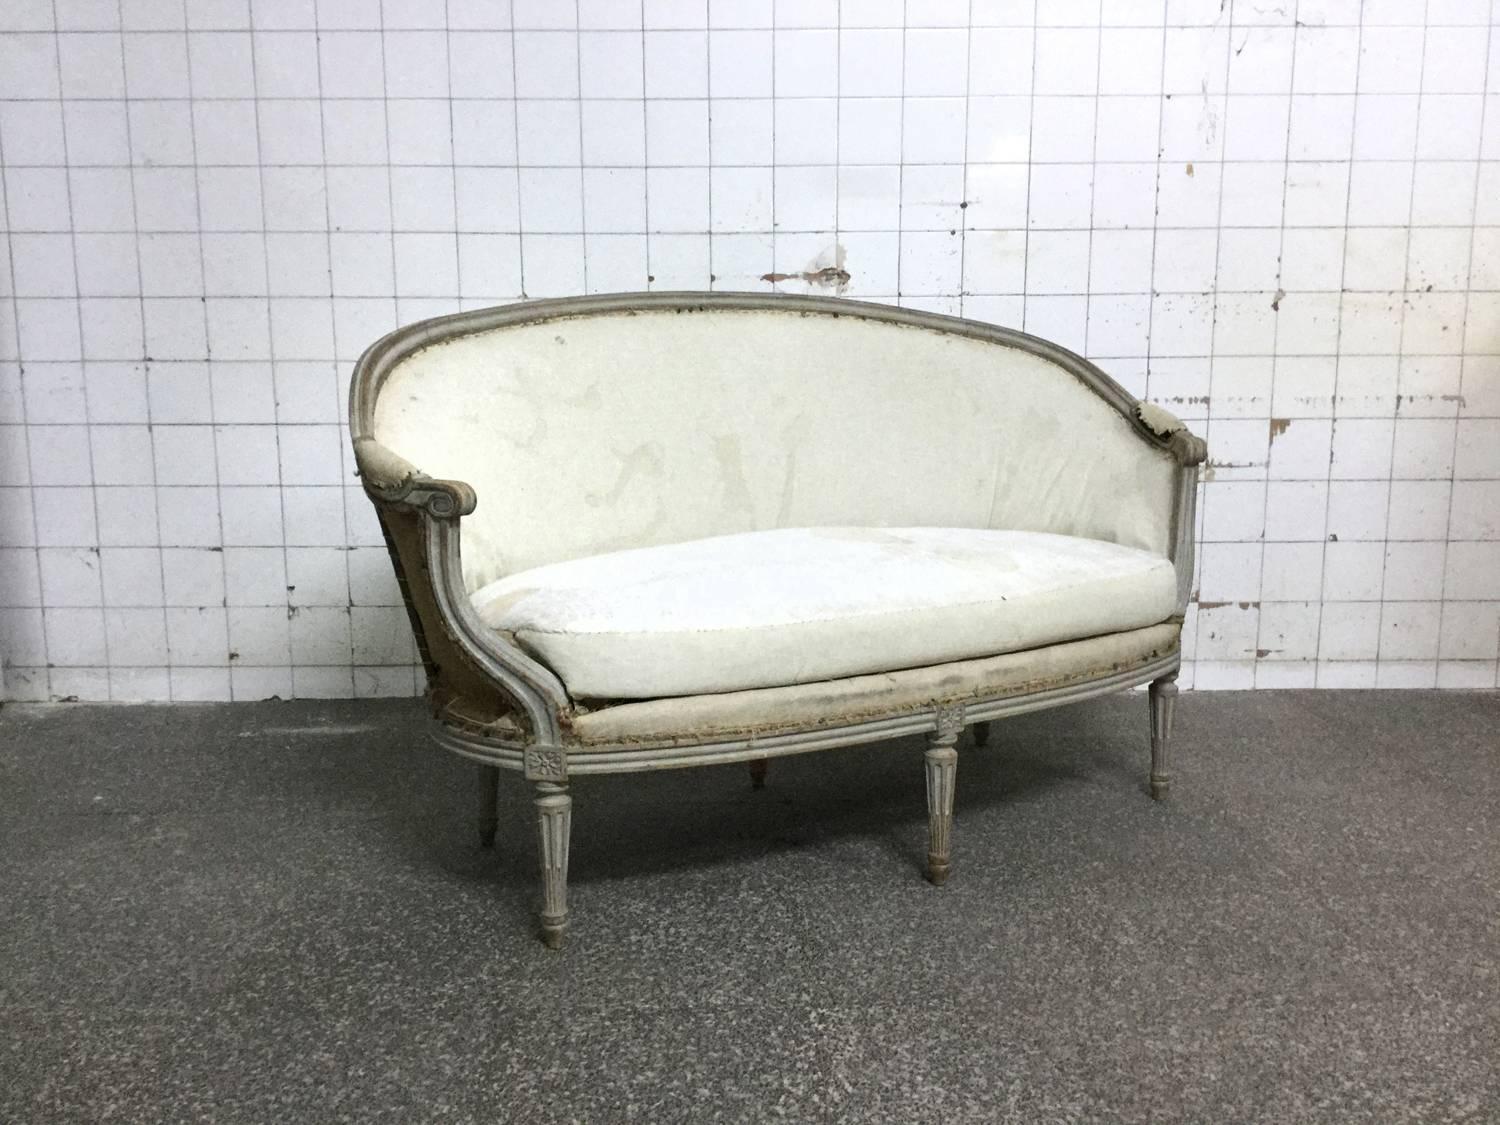 19th century Louis XVI style French settee.